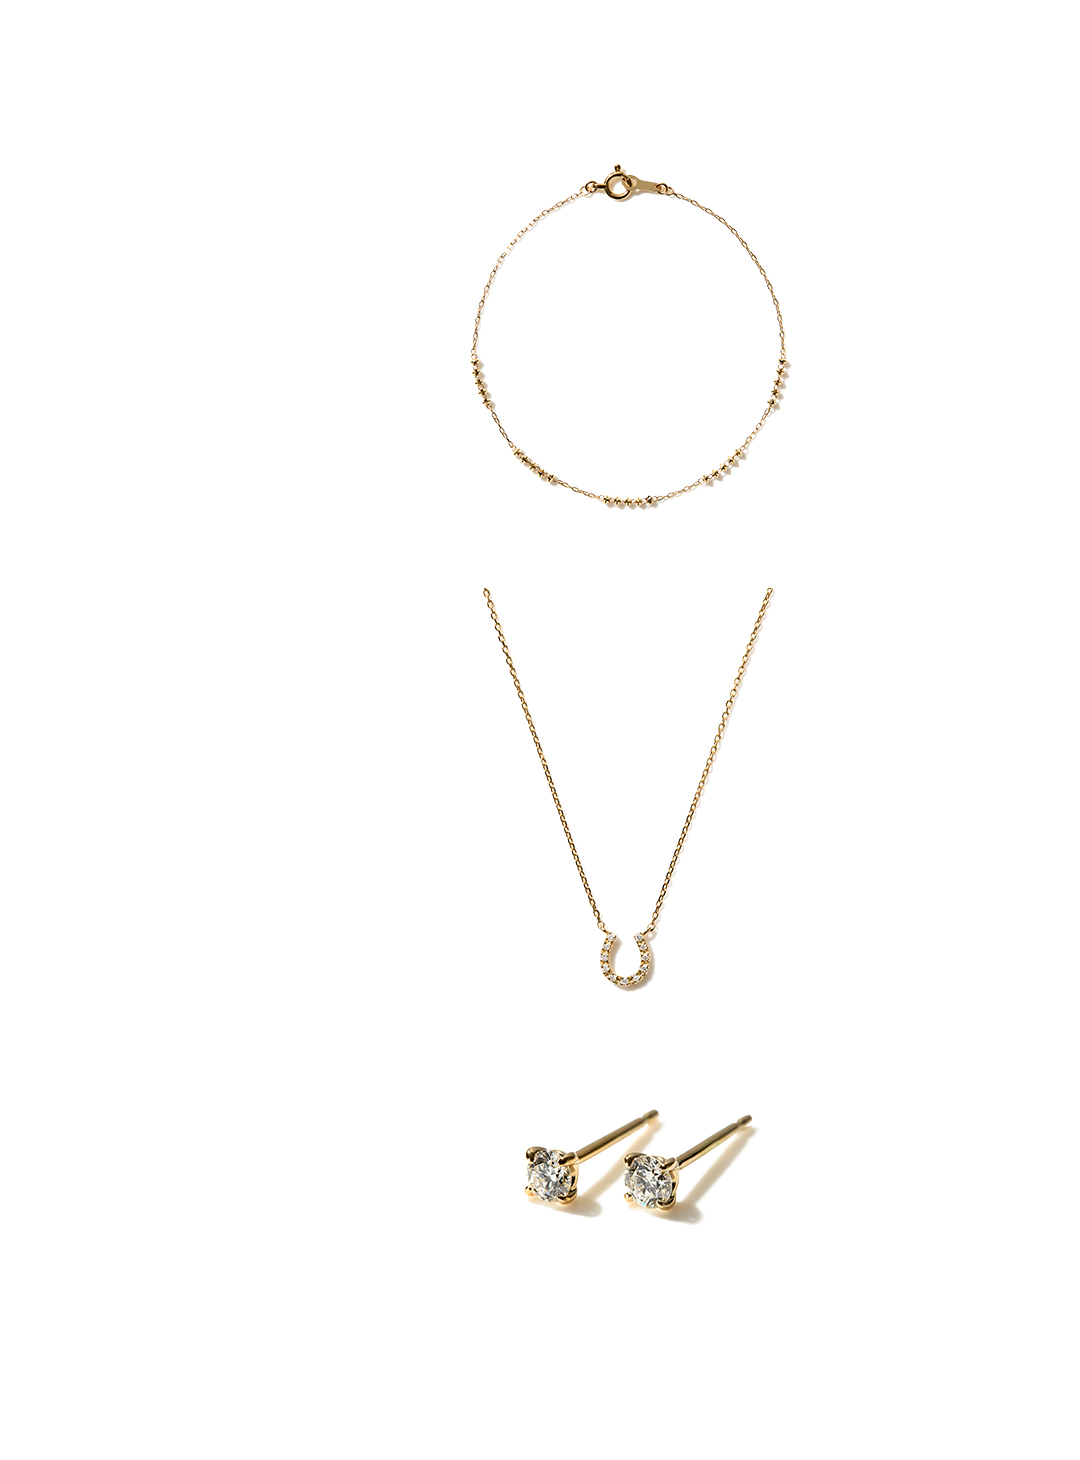 Pieces of Timeless Jewelry, K18 Gold